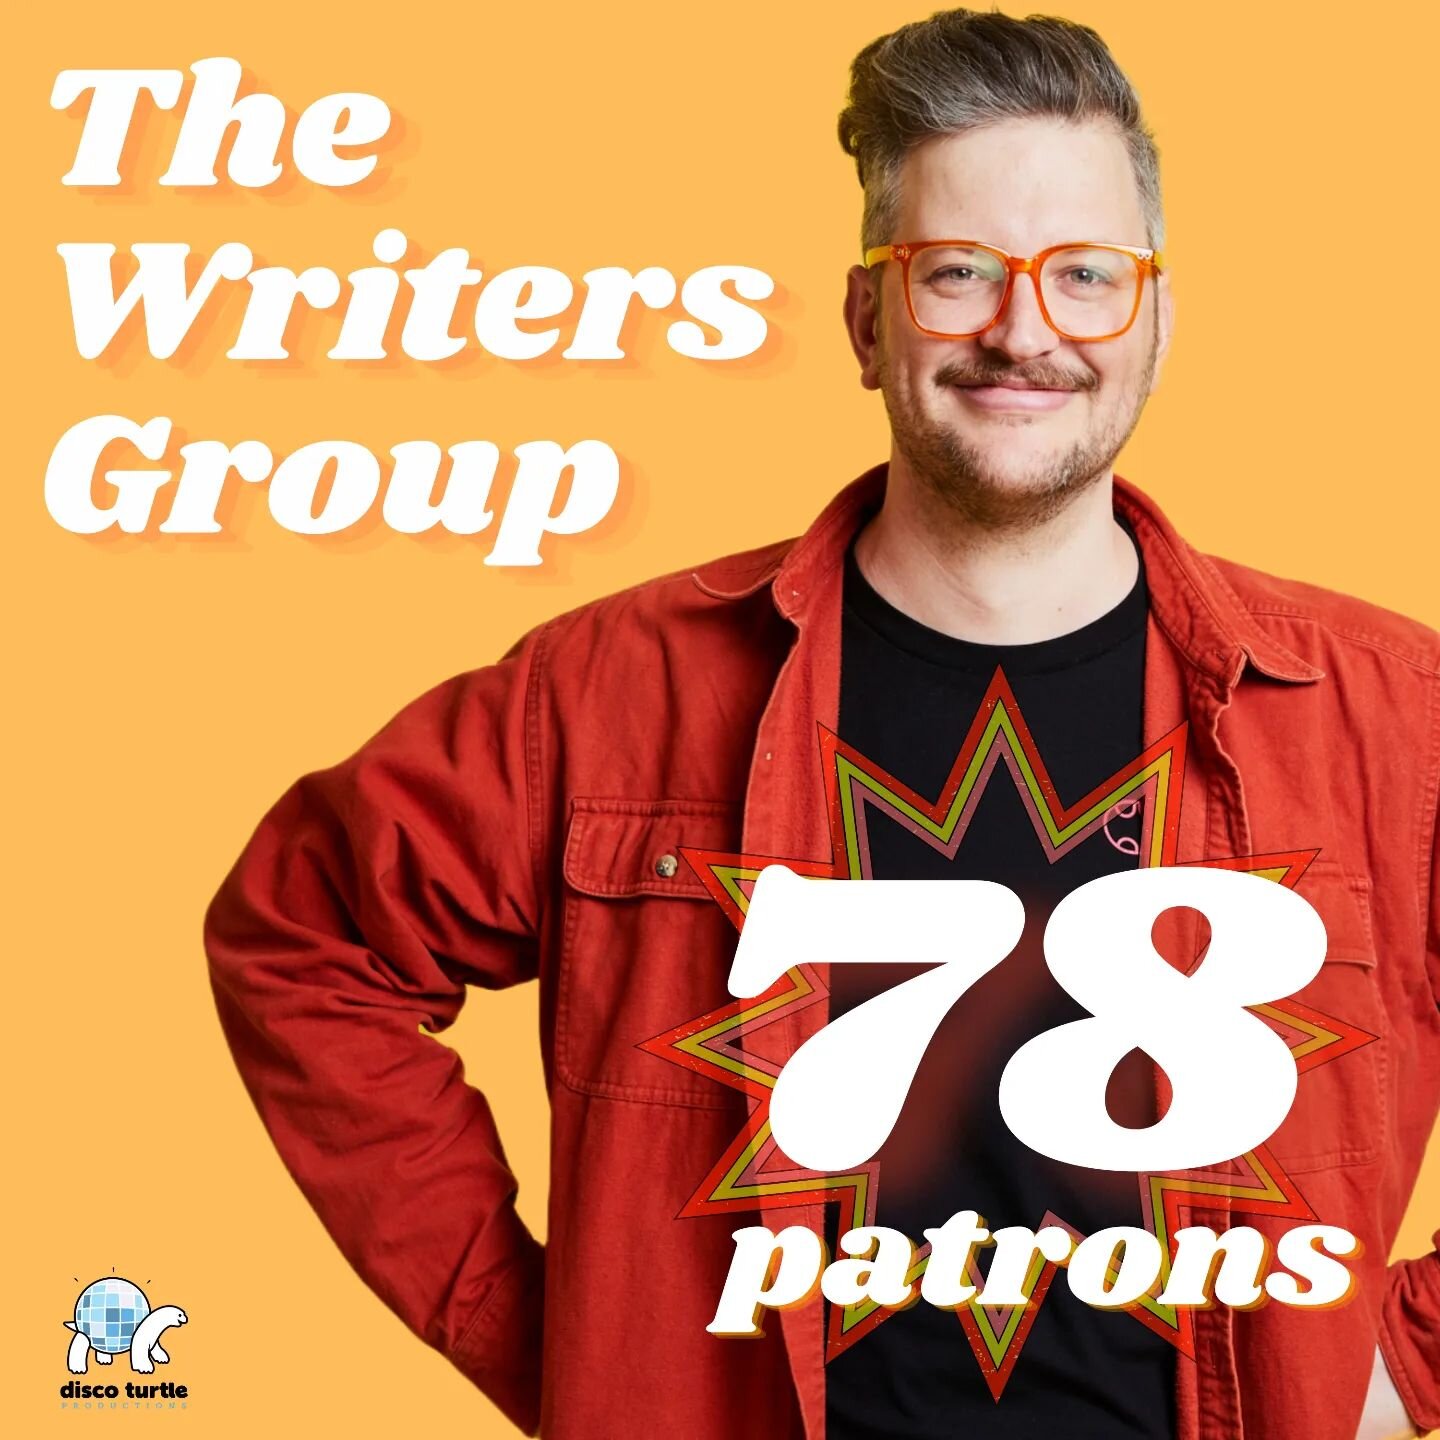 We're so close to 80 members!

If you haven't heard about The Writers Group it's an online community dedicated to creating a warm environment for comedians to test out their material and become better at what they do.

Currently we have three online 